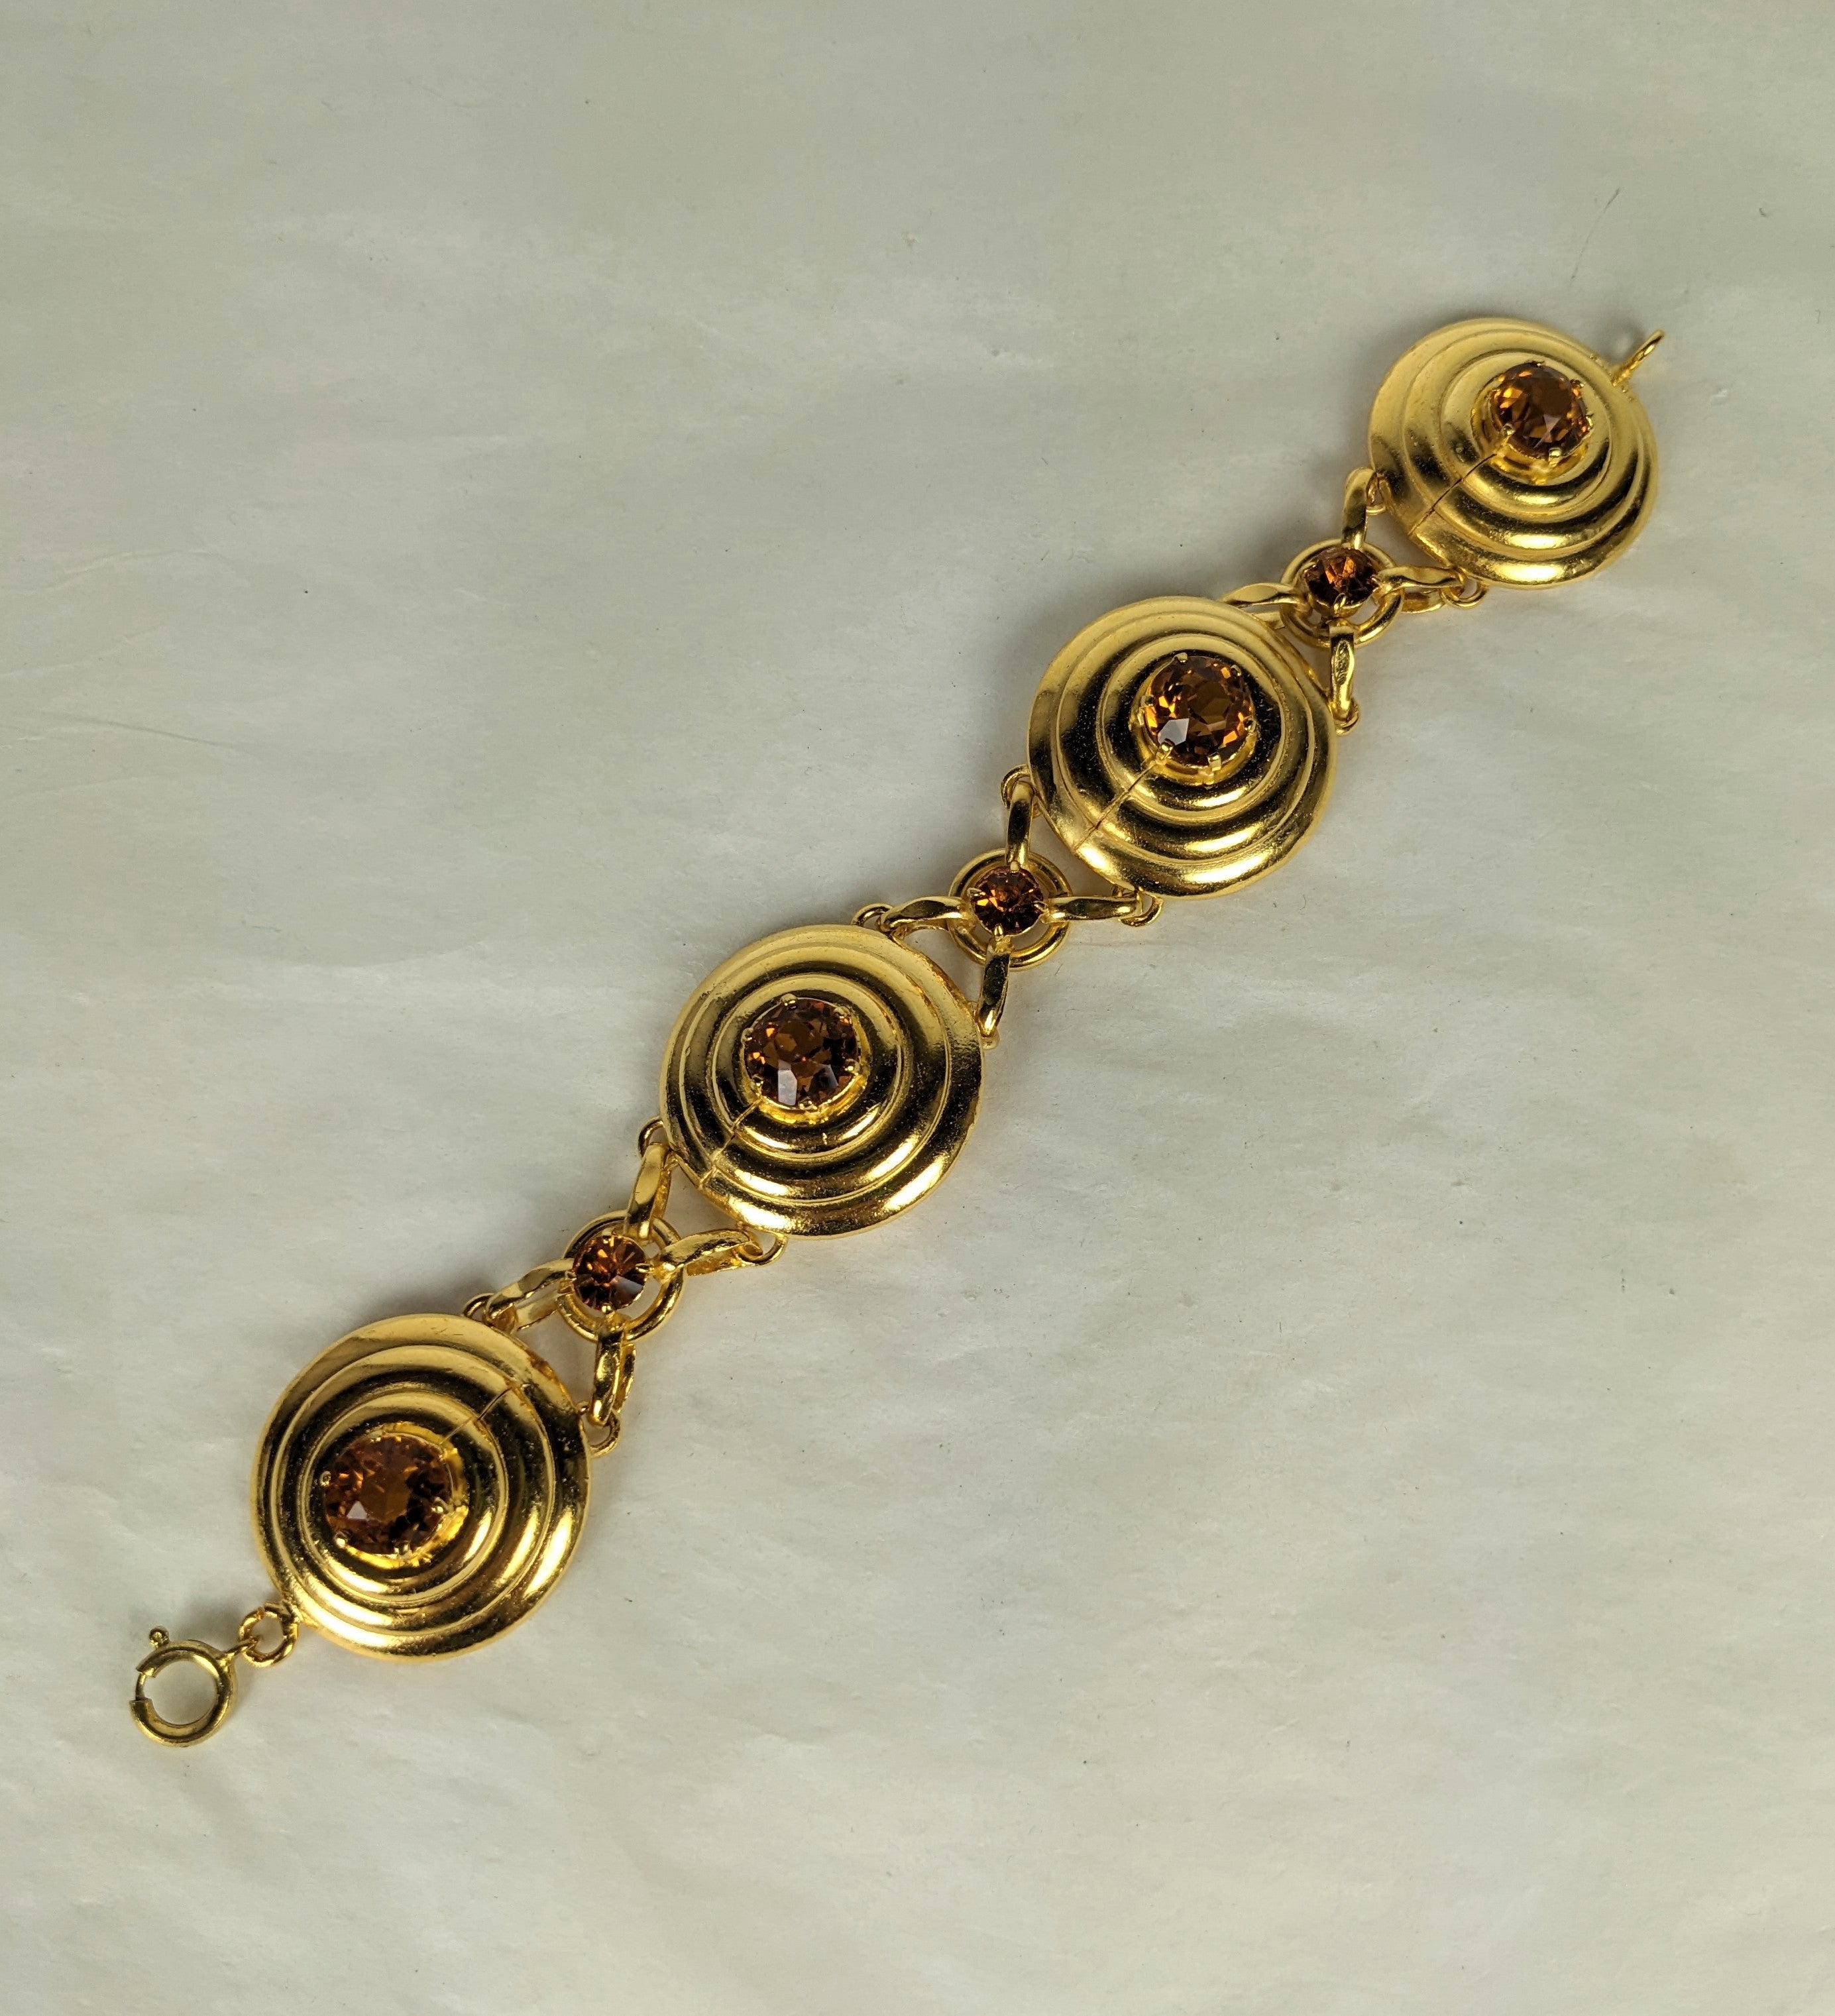 Elegant, striking French Retro Stepped Link Bracelet with citrine pastes circa 1940's. 4 stepped circular motifs are set with citrine pastes with flexible link connectors. 1940's France. 8